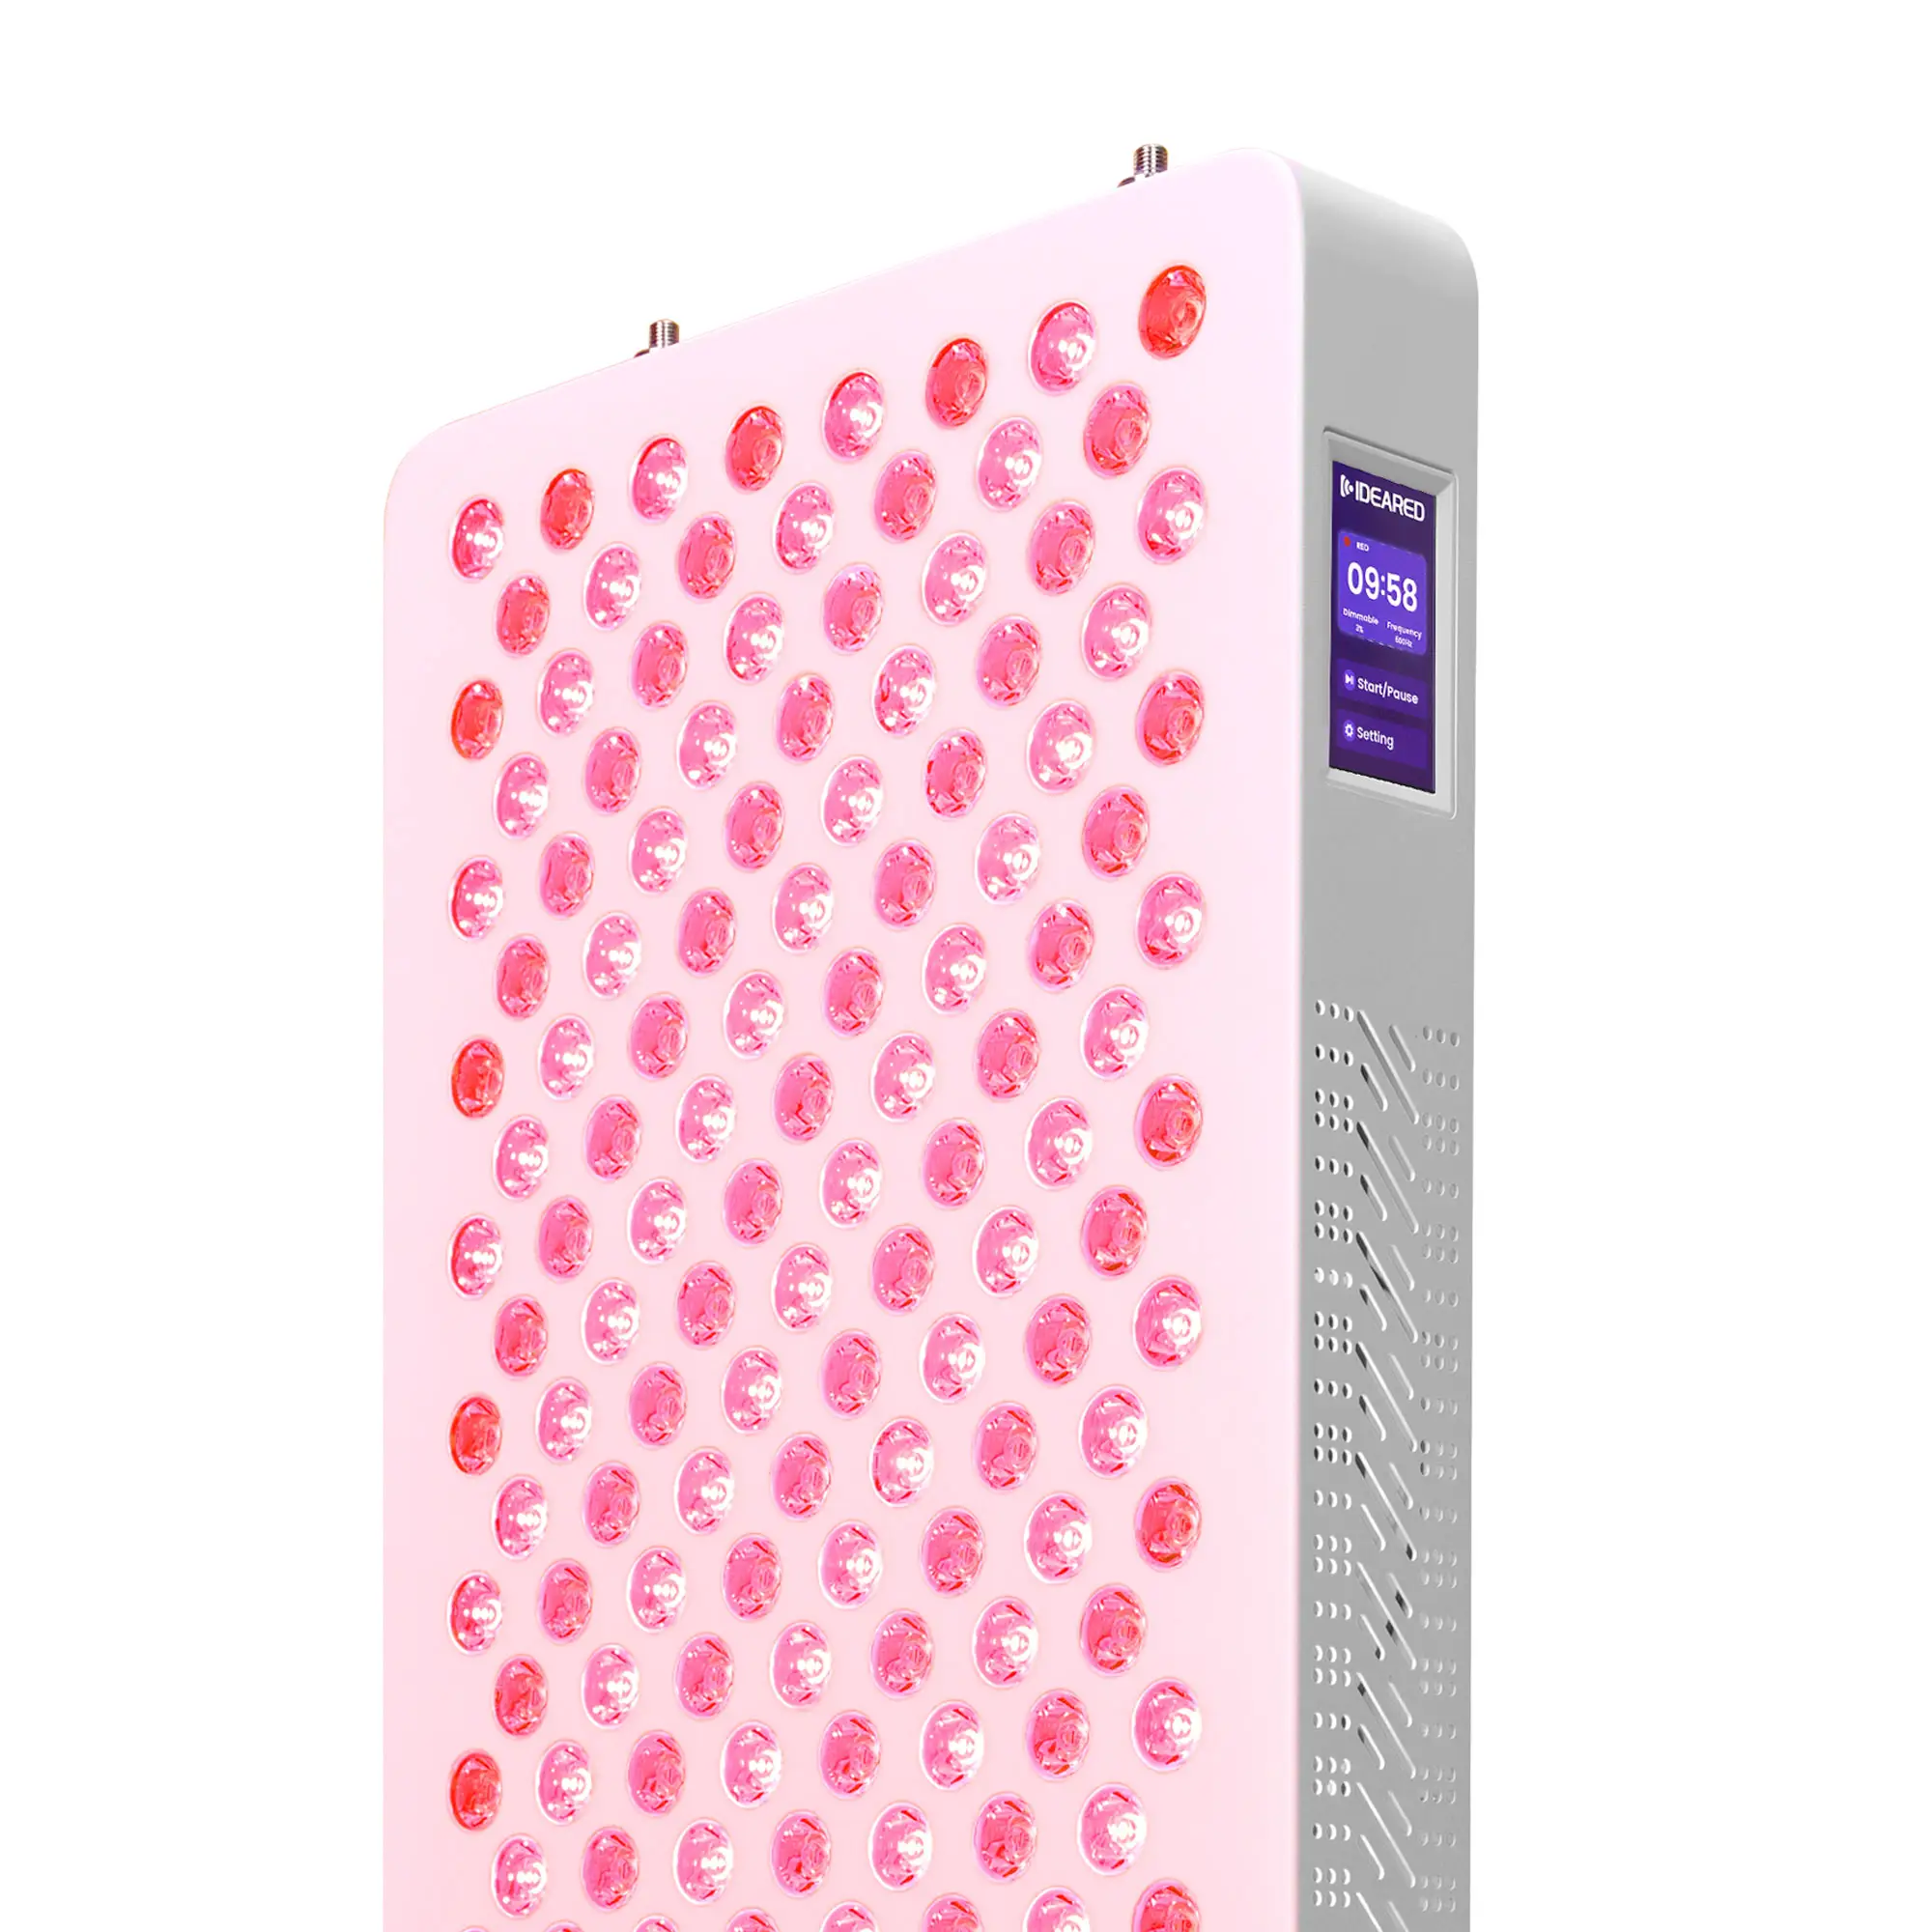 IDEARED Newest &Hottest Red Light Therapy Panel RL Series 630nm 660nm 810nm 830nm 850nm Skin Care Red Infra Device For Full Body